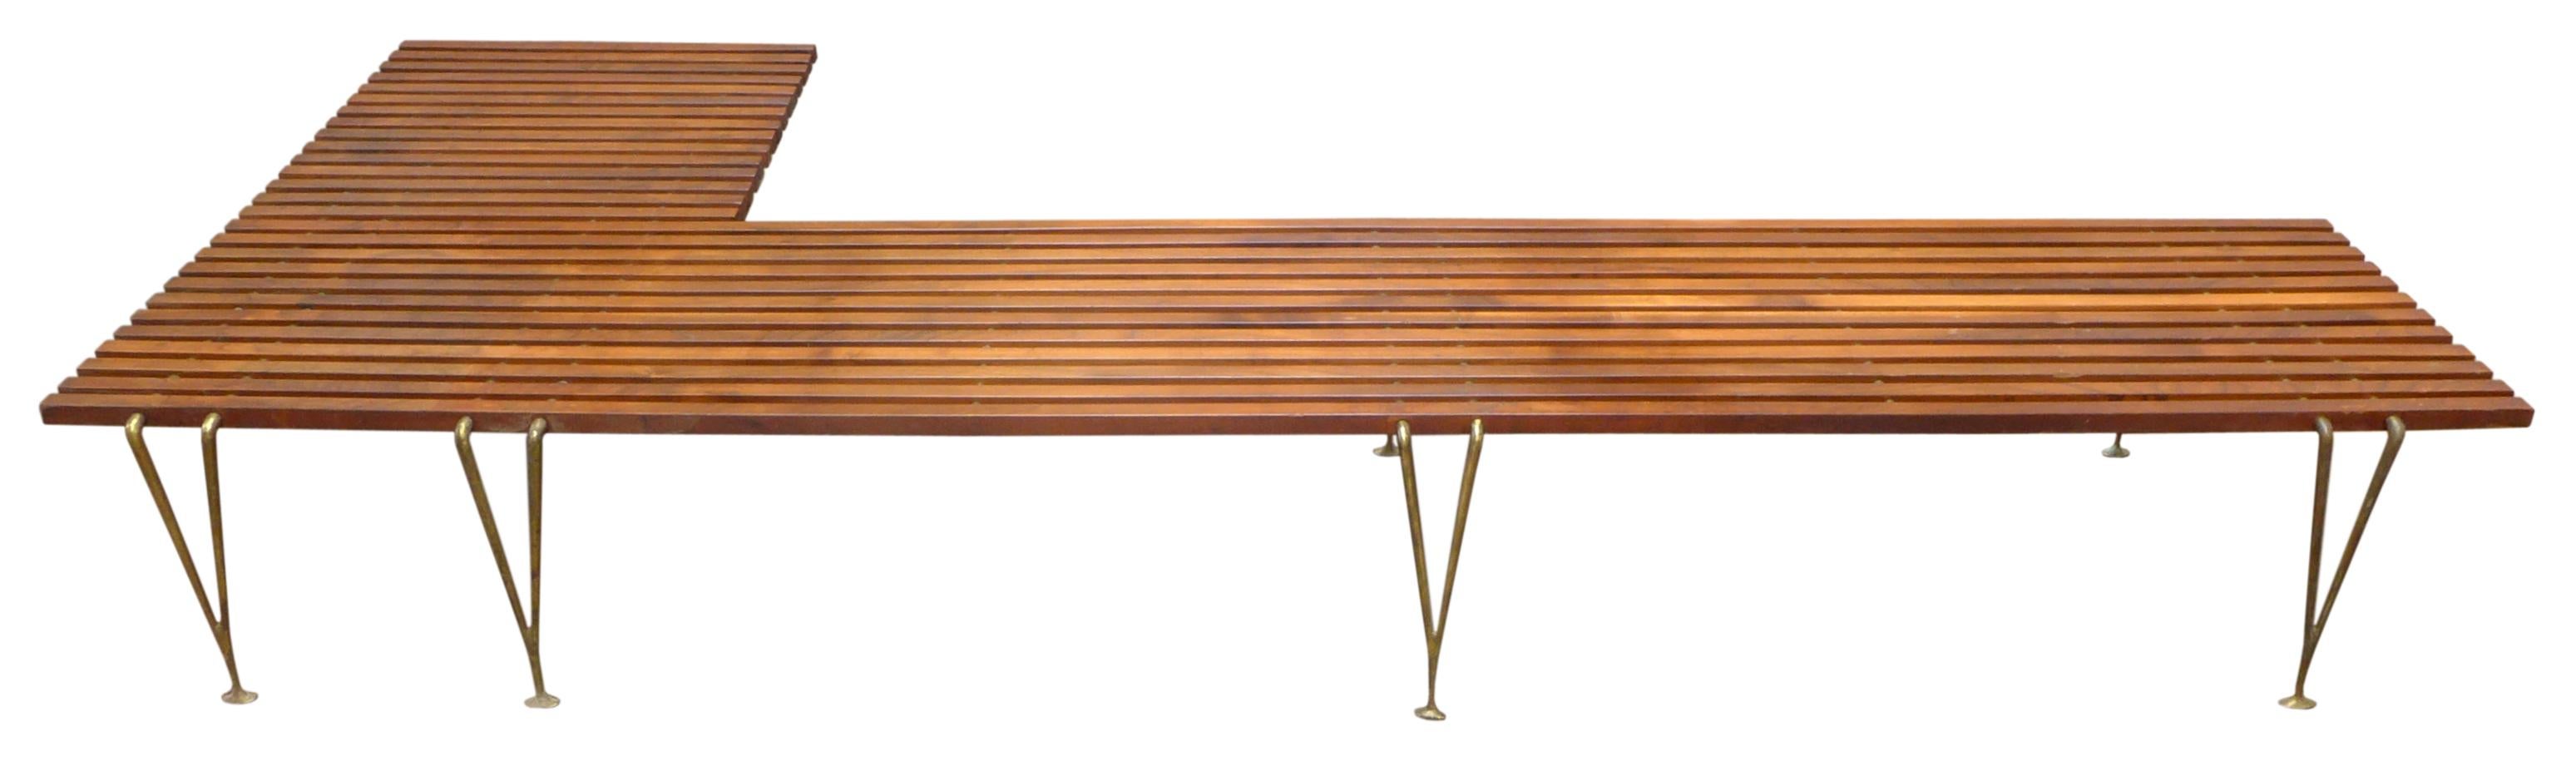 An extremely unusual and possibly unique, L-shaped slat bench attributed to Hugh Acton. Likely a custom commission for a specific residence, as no other examples of this form have been seen. A fantastic design with slatted-walnut surface elements